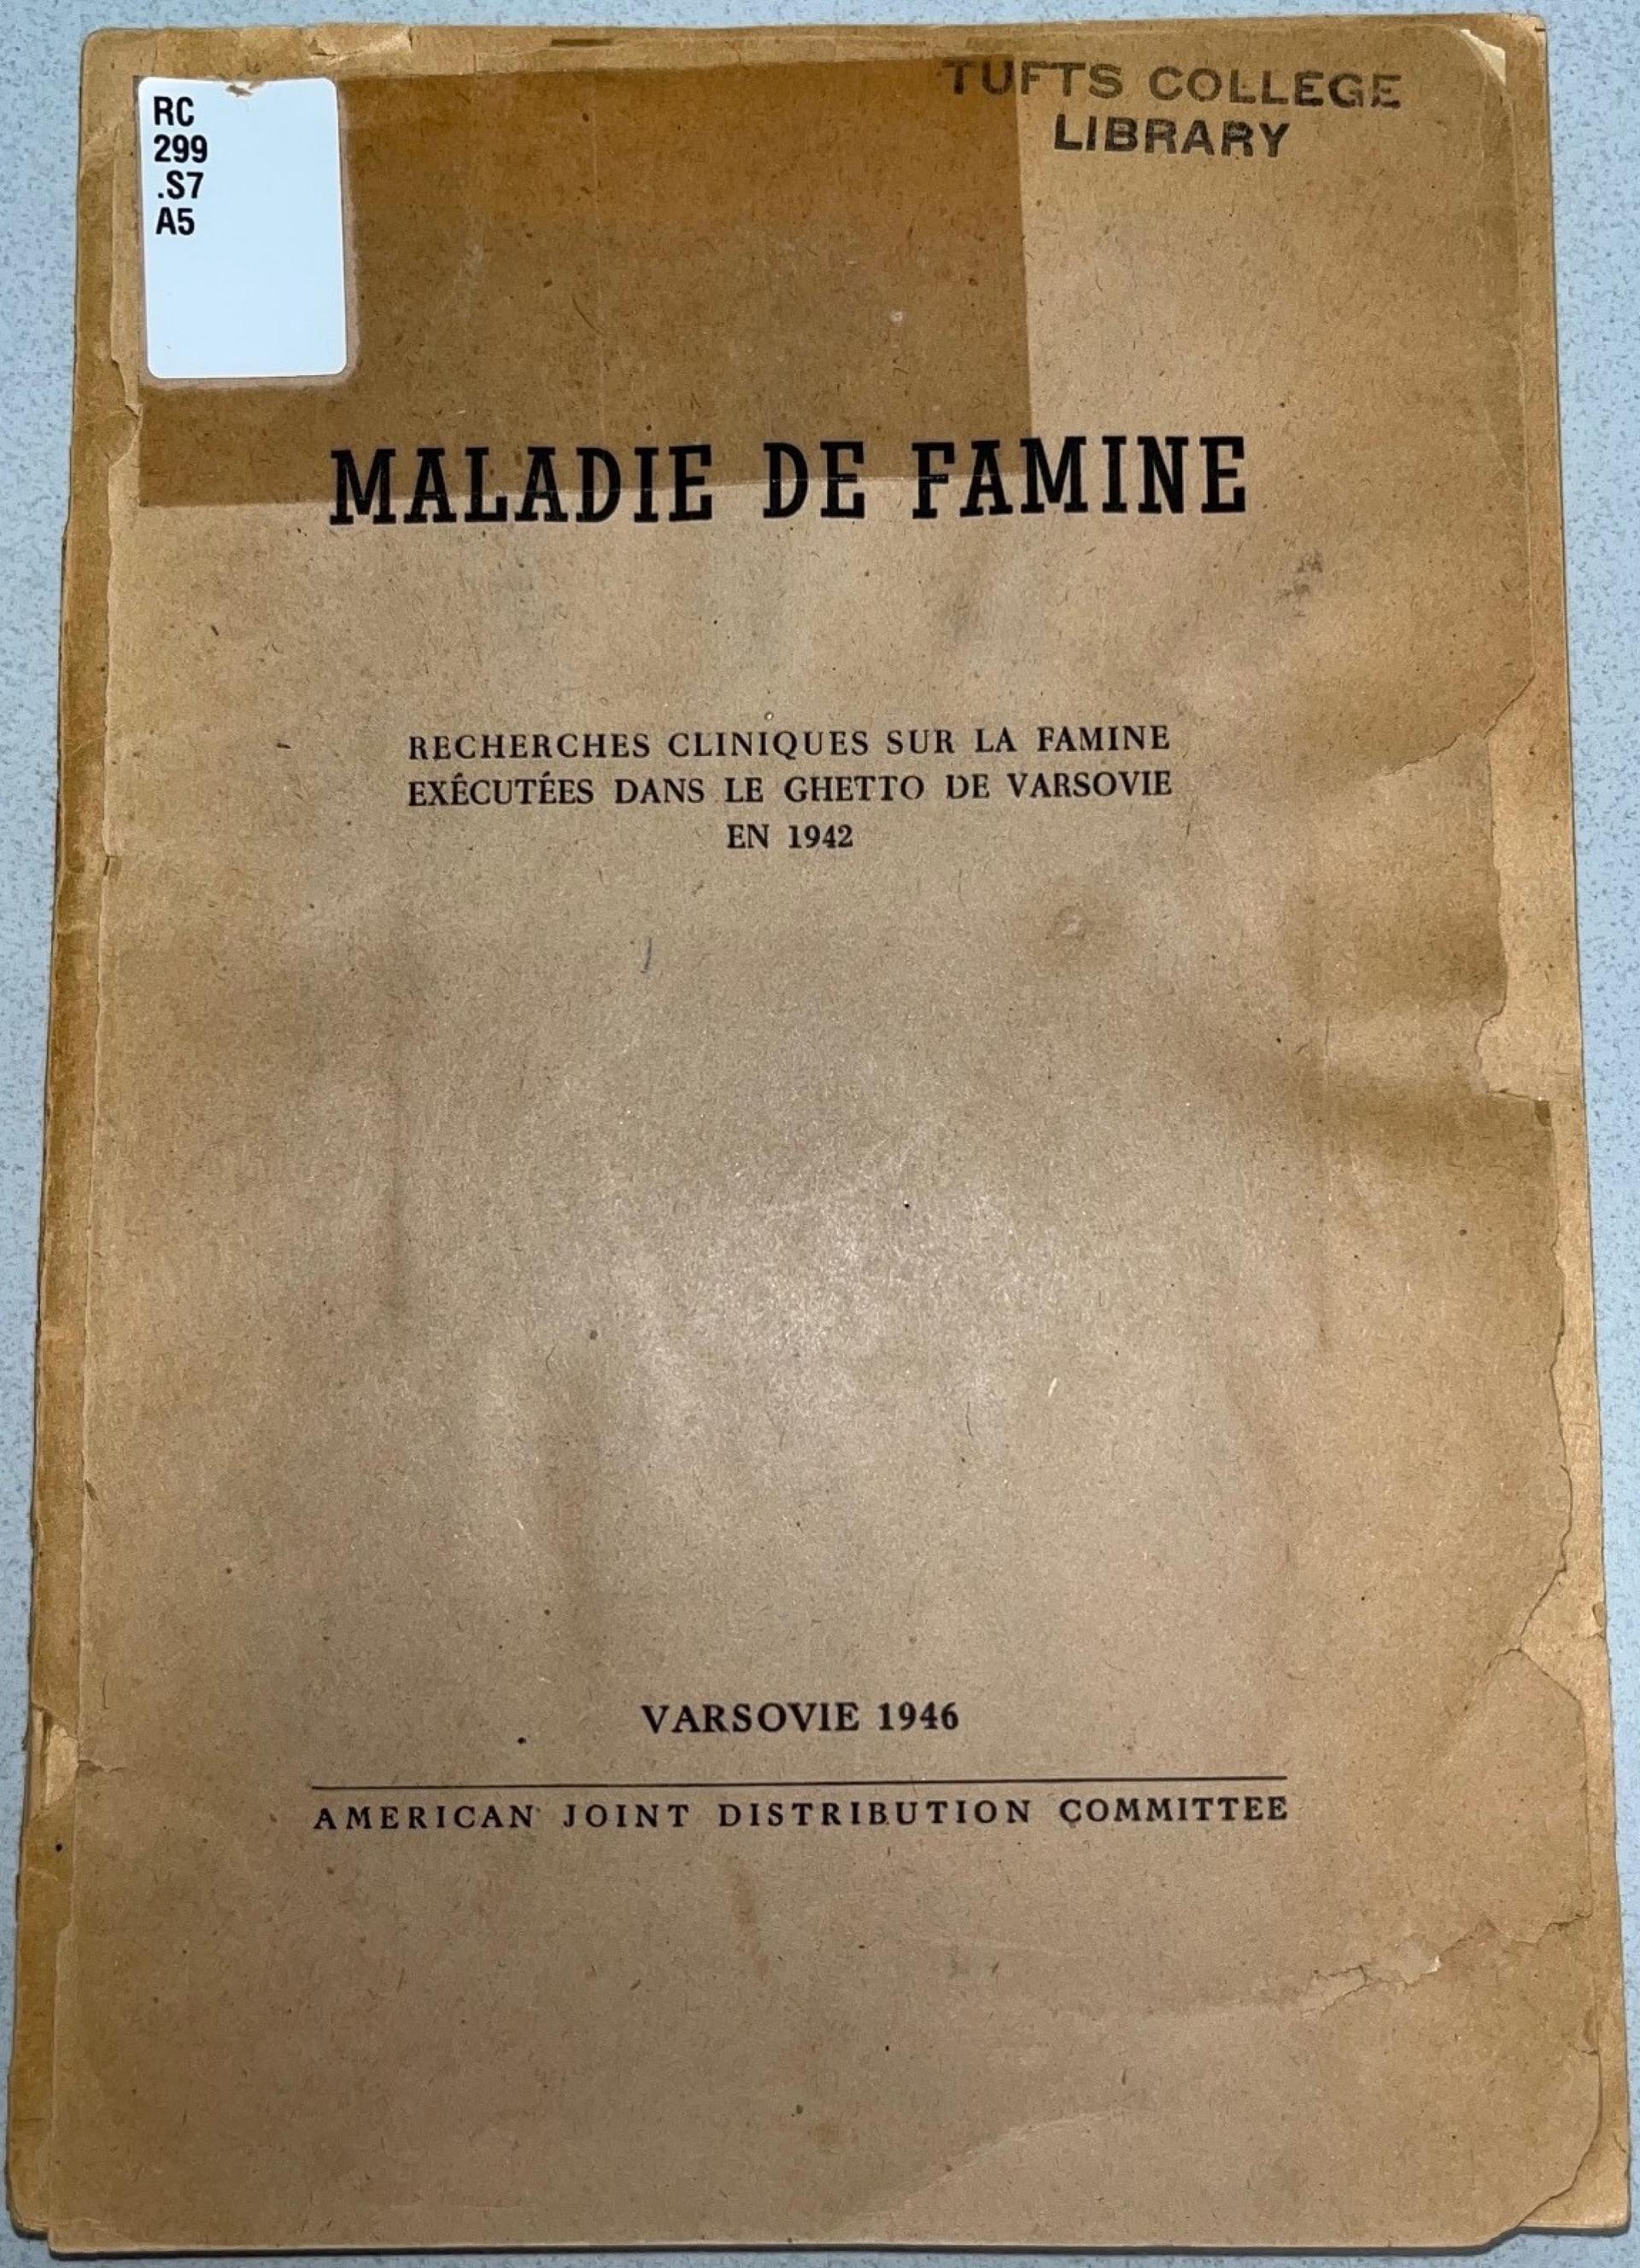 This French translation was donated to the Tufts University library in 1948.